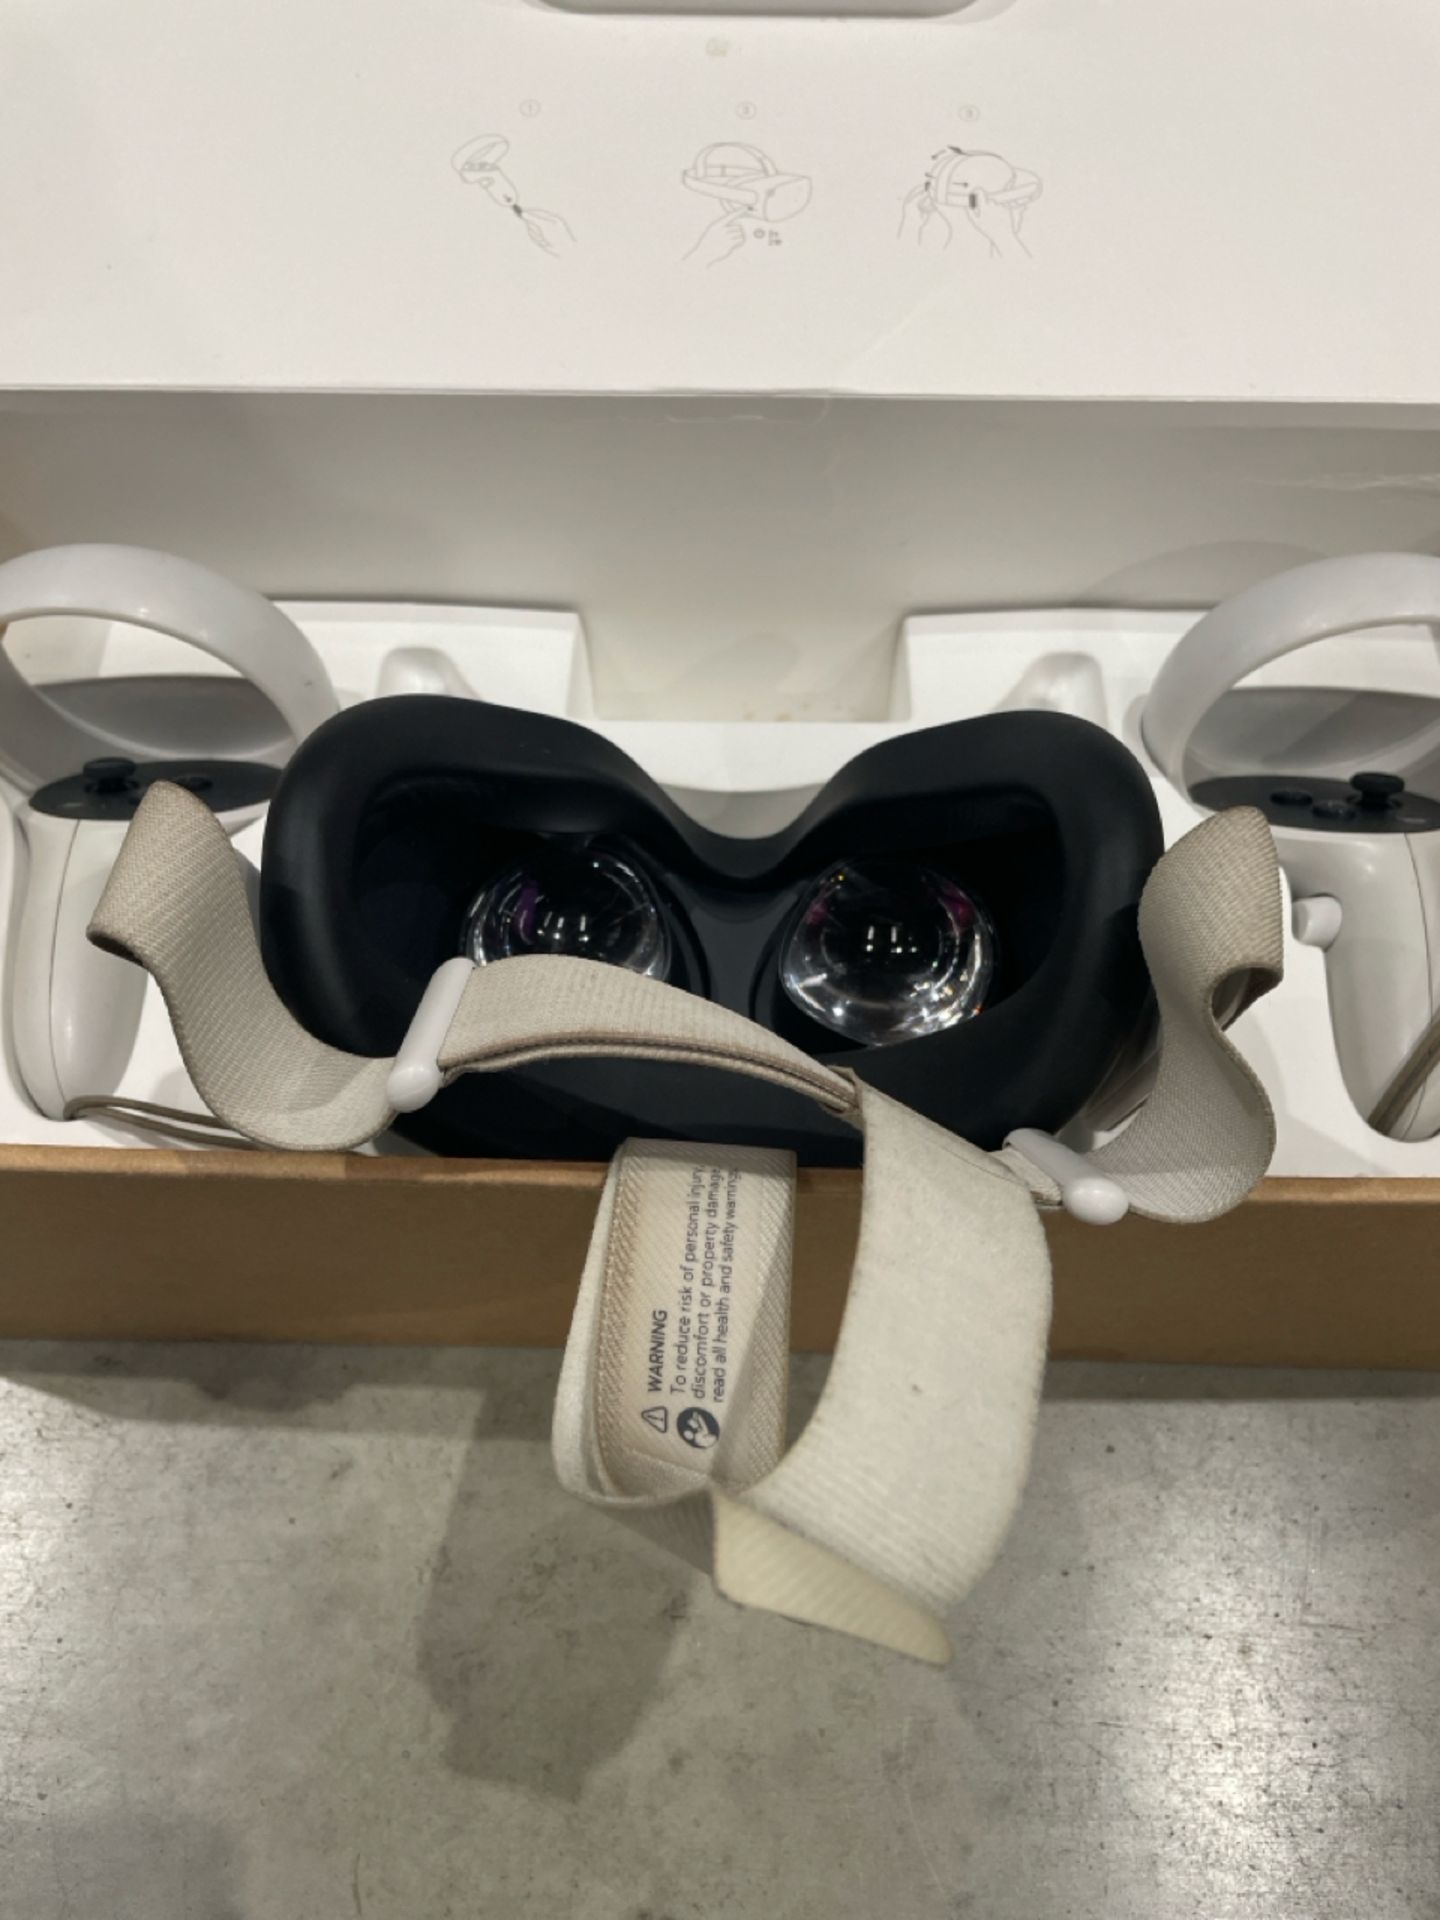 Meta Quest 2 VR Headset - Image 3 of 3